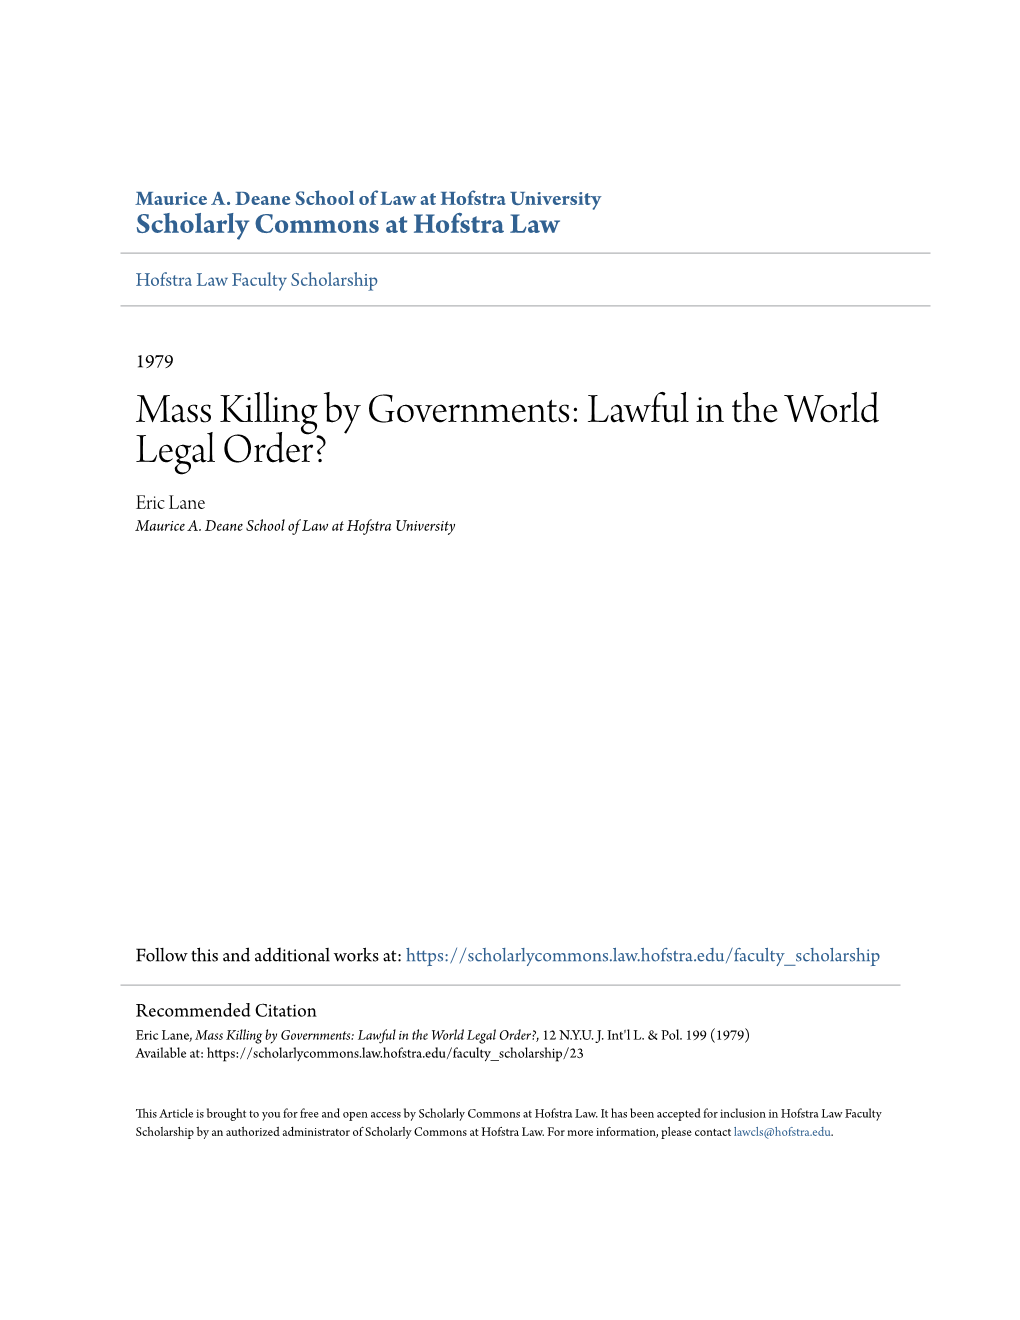 Mass Killing by Governments: Lawful in the World Legal Order? Eric Lane Maurice A